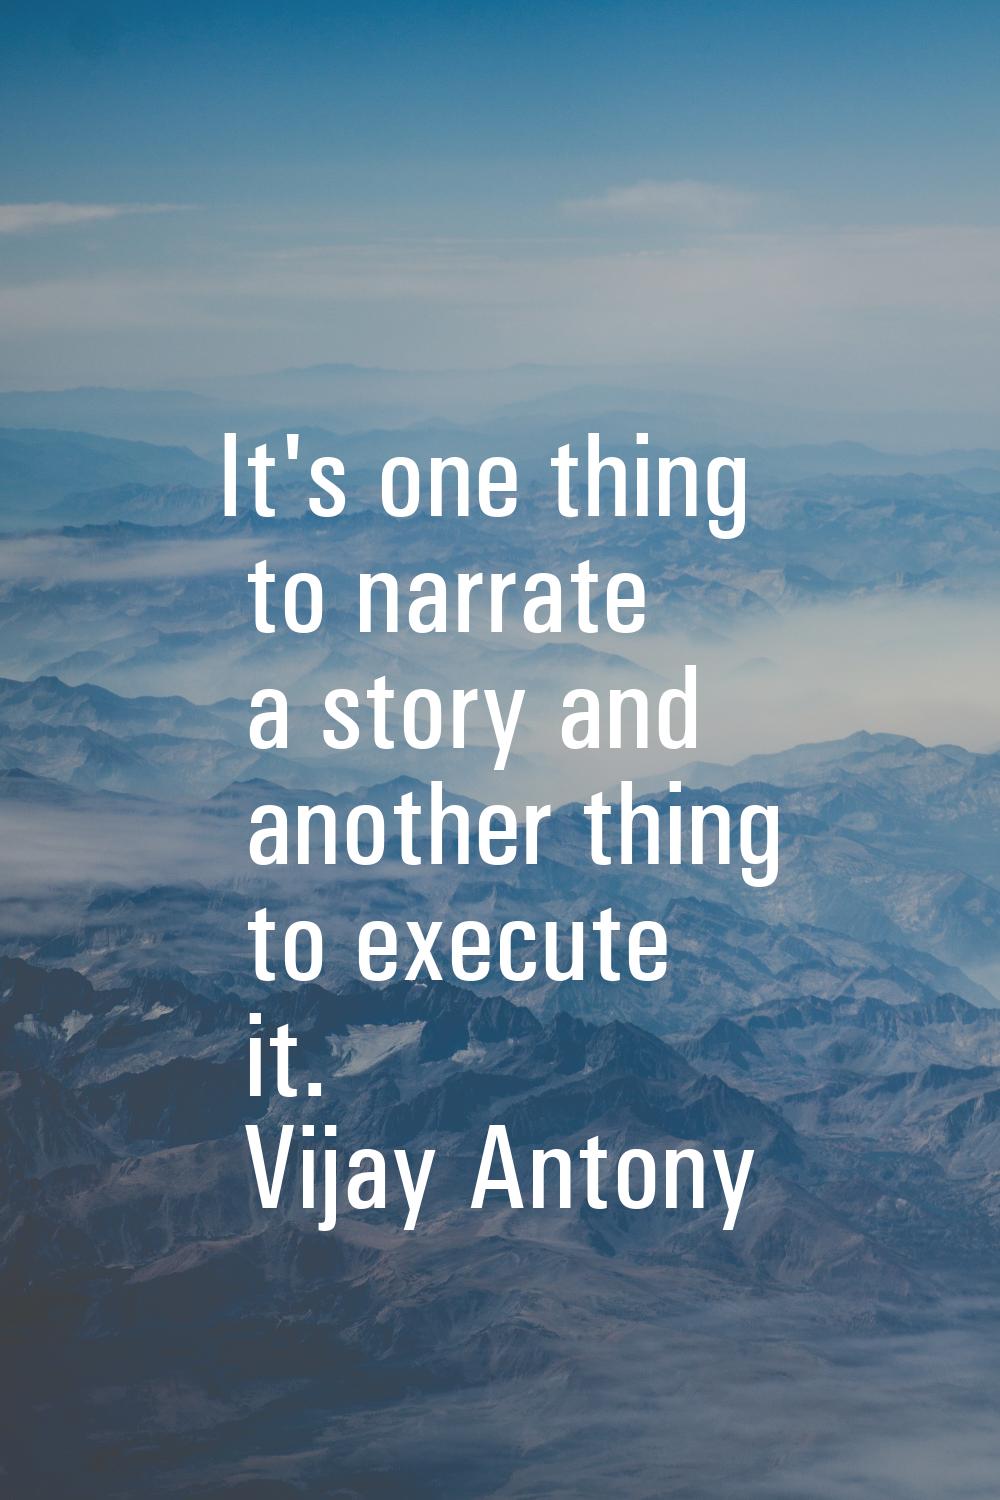 It's one thing to narrate a story and another thing to execute it.